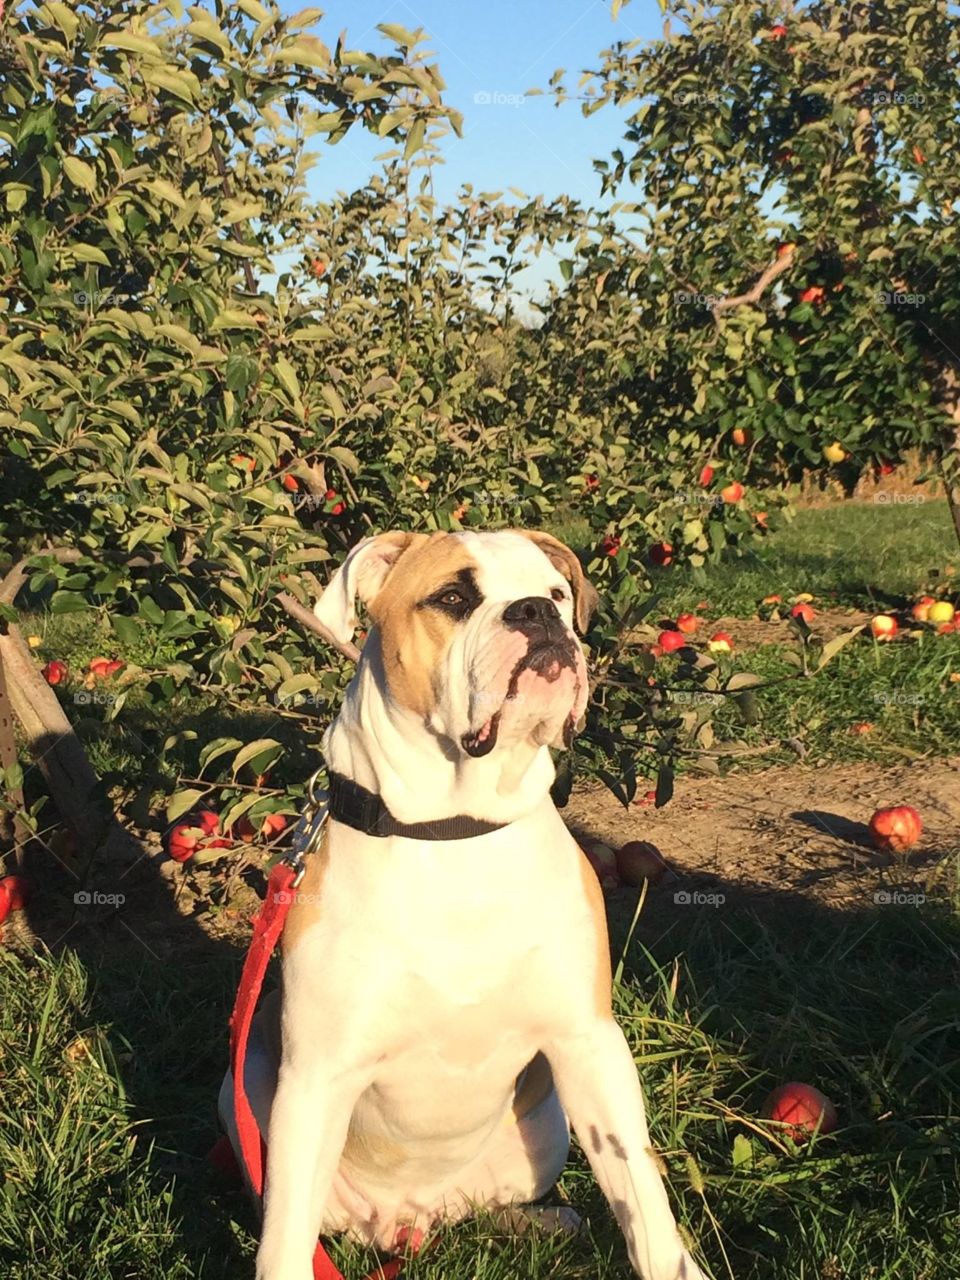 Apples and American bulldogs 